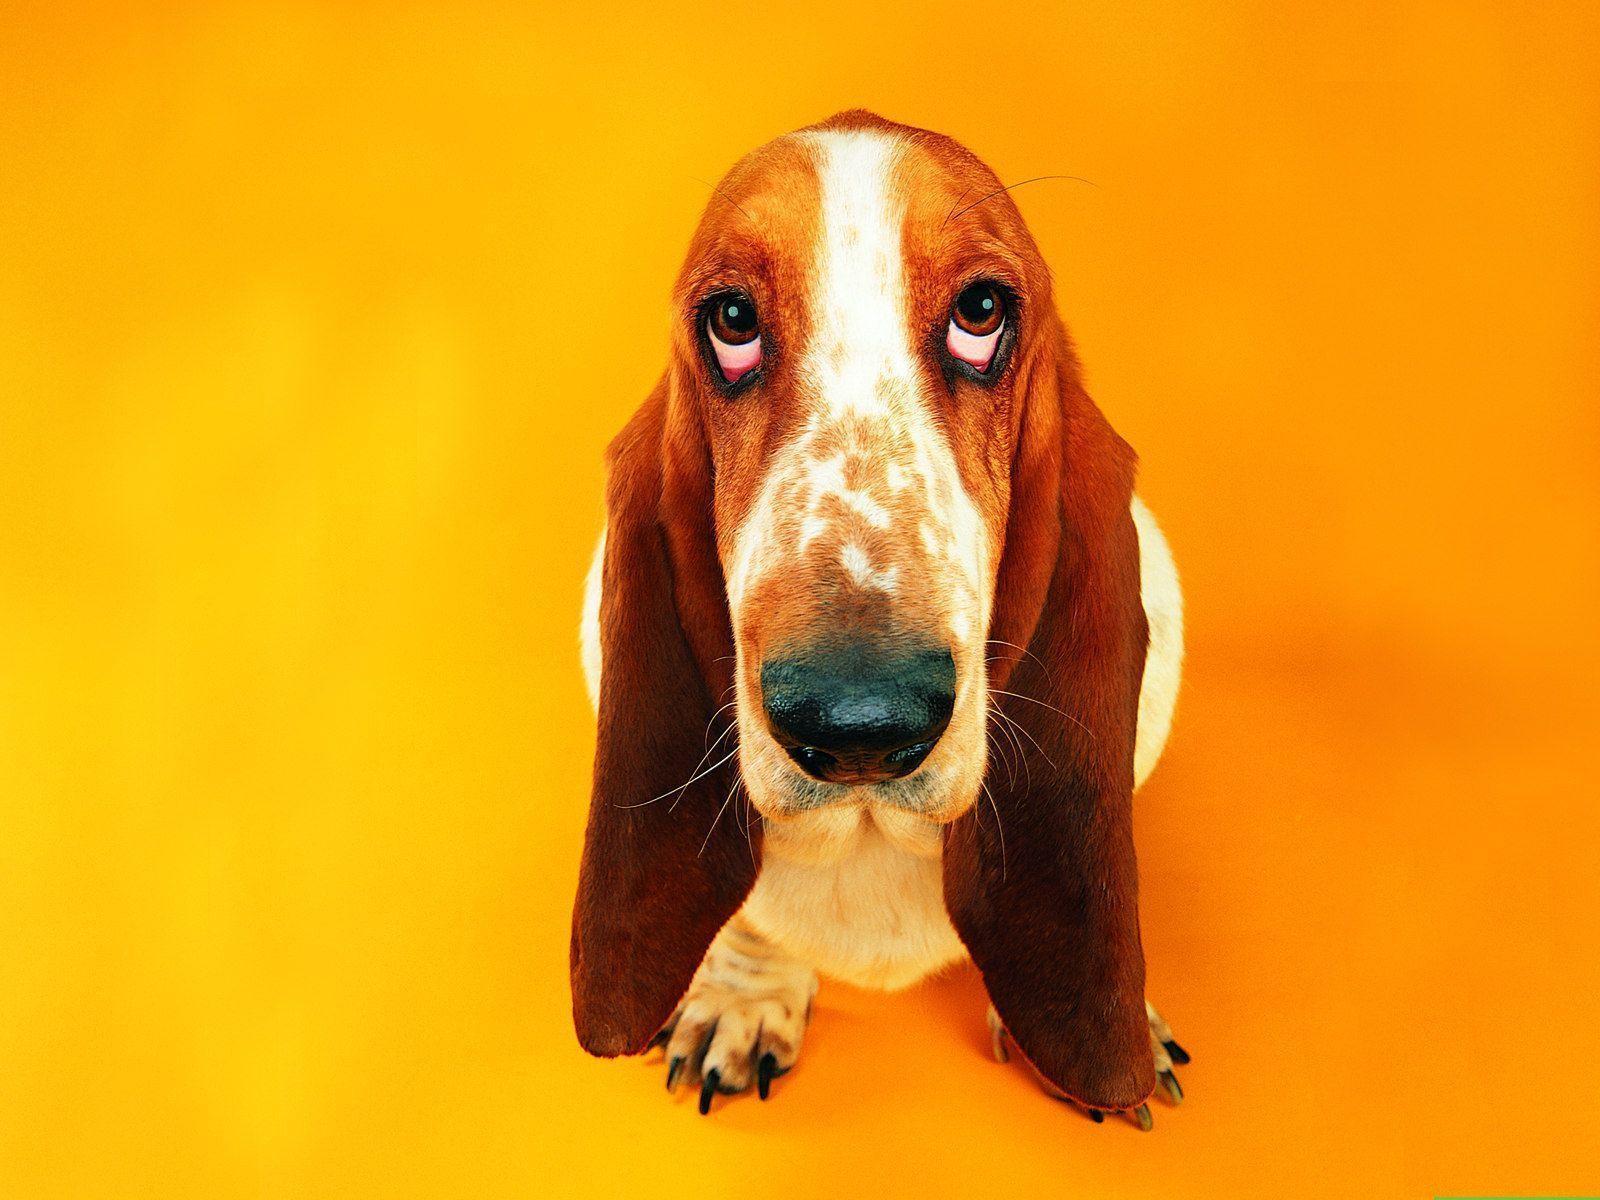 Cute basset hound on an orange background wallpaper and image